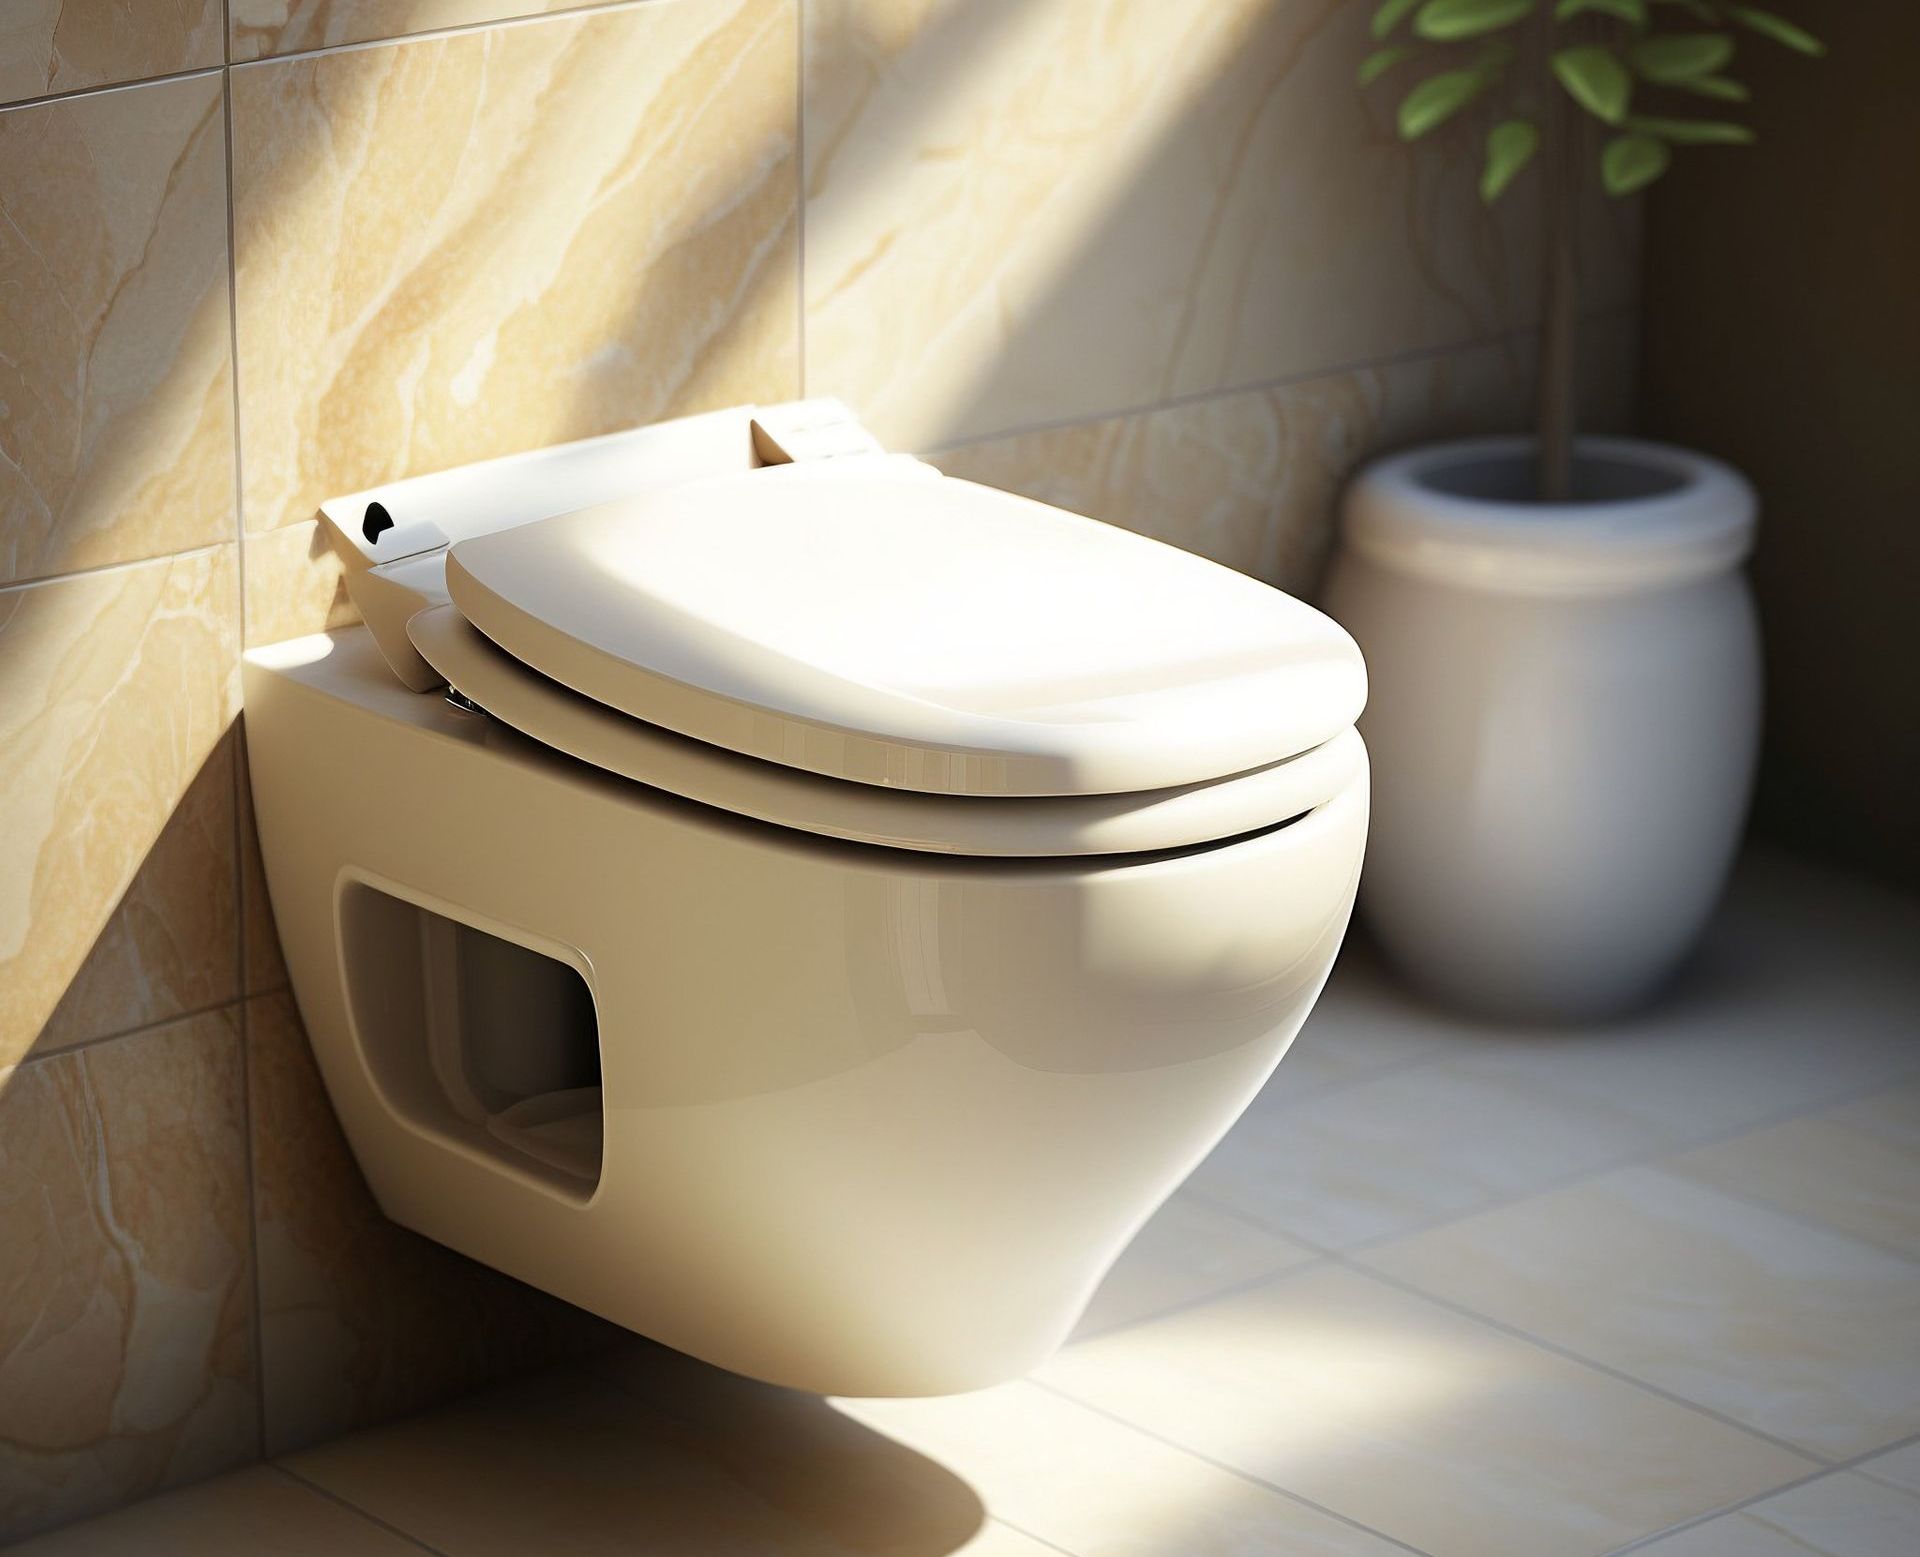 A garden room with a composting toilet, providing an efficient and sustainable solution.